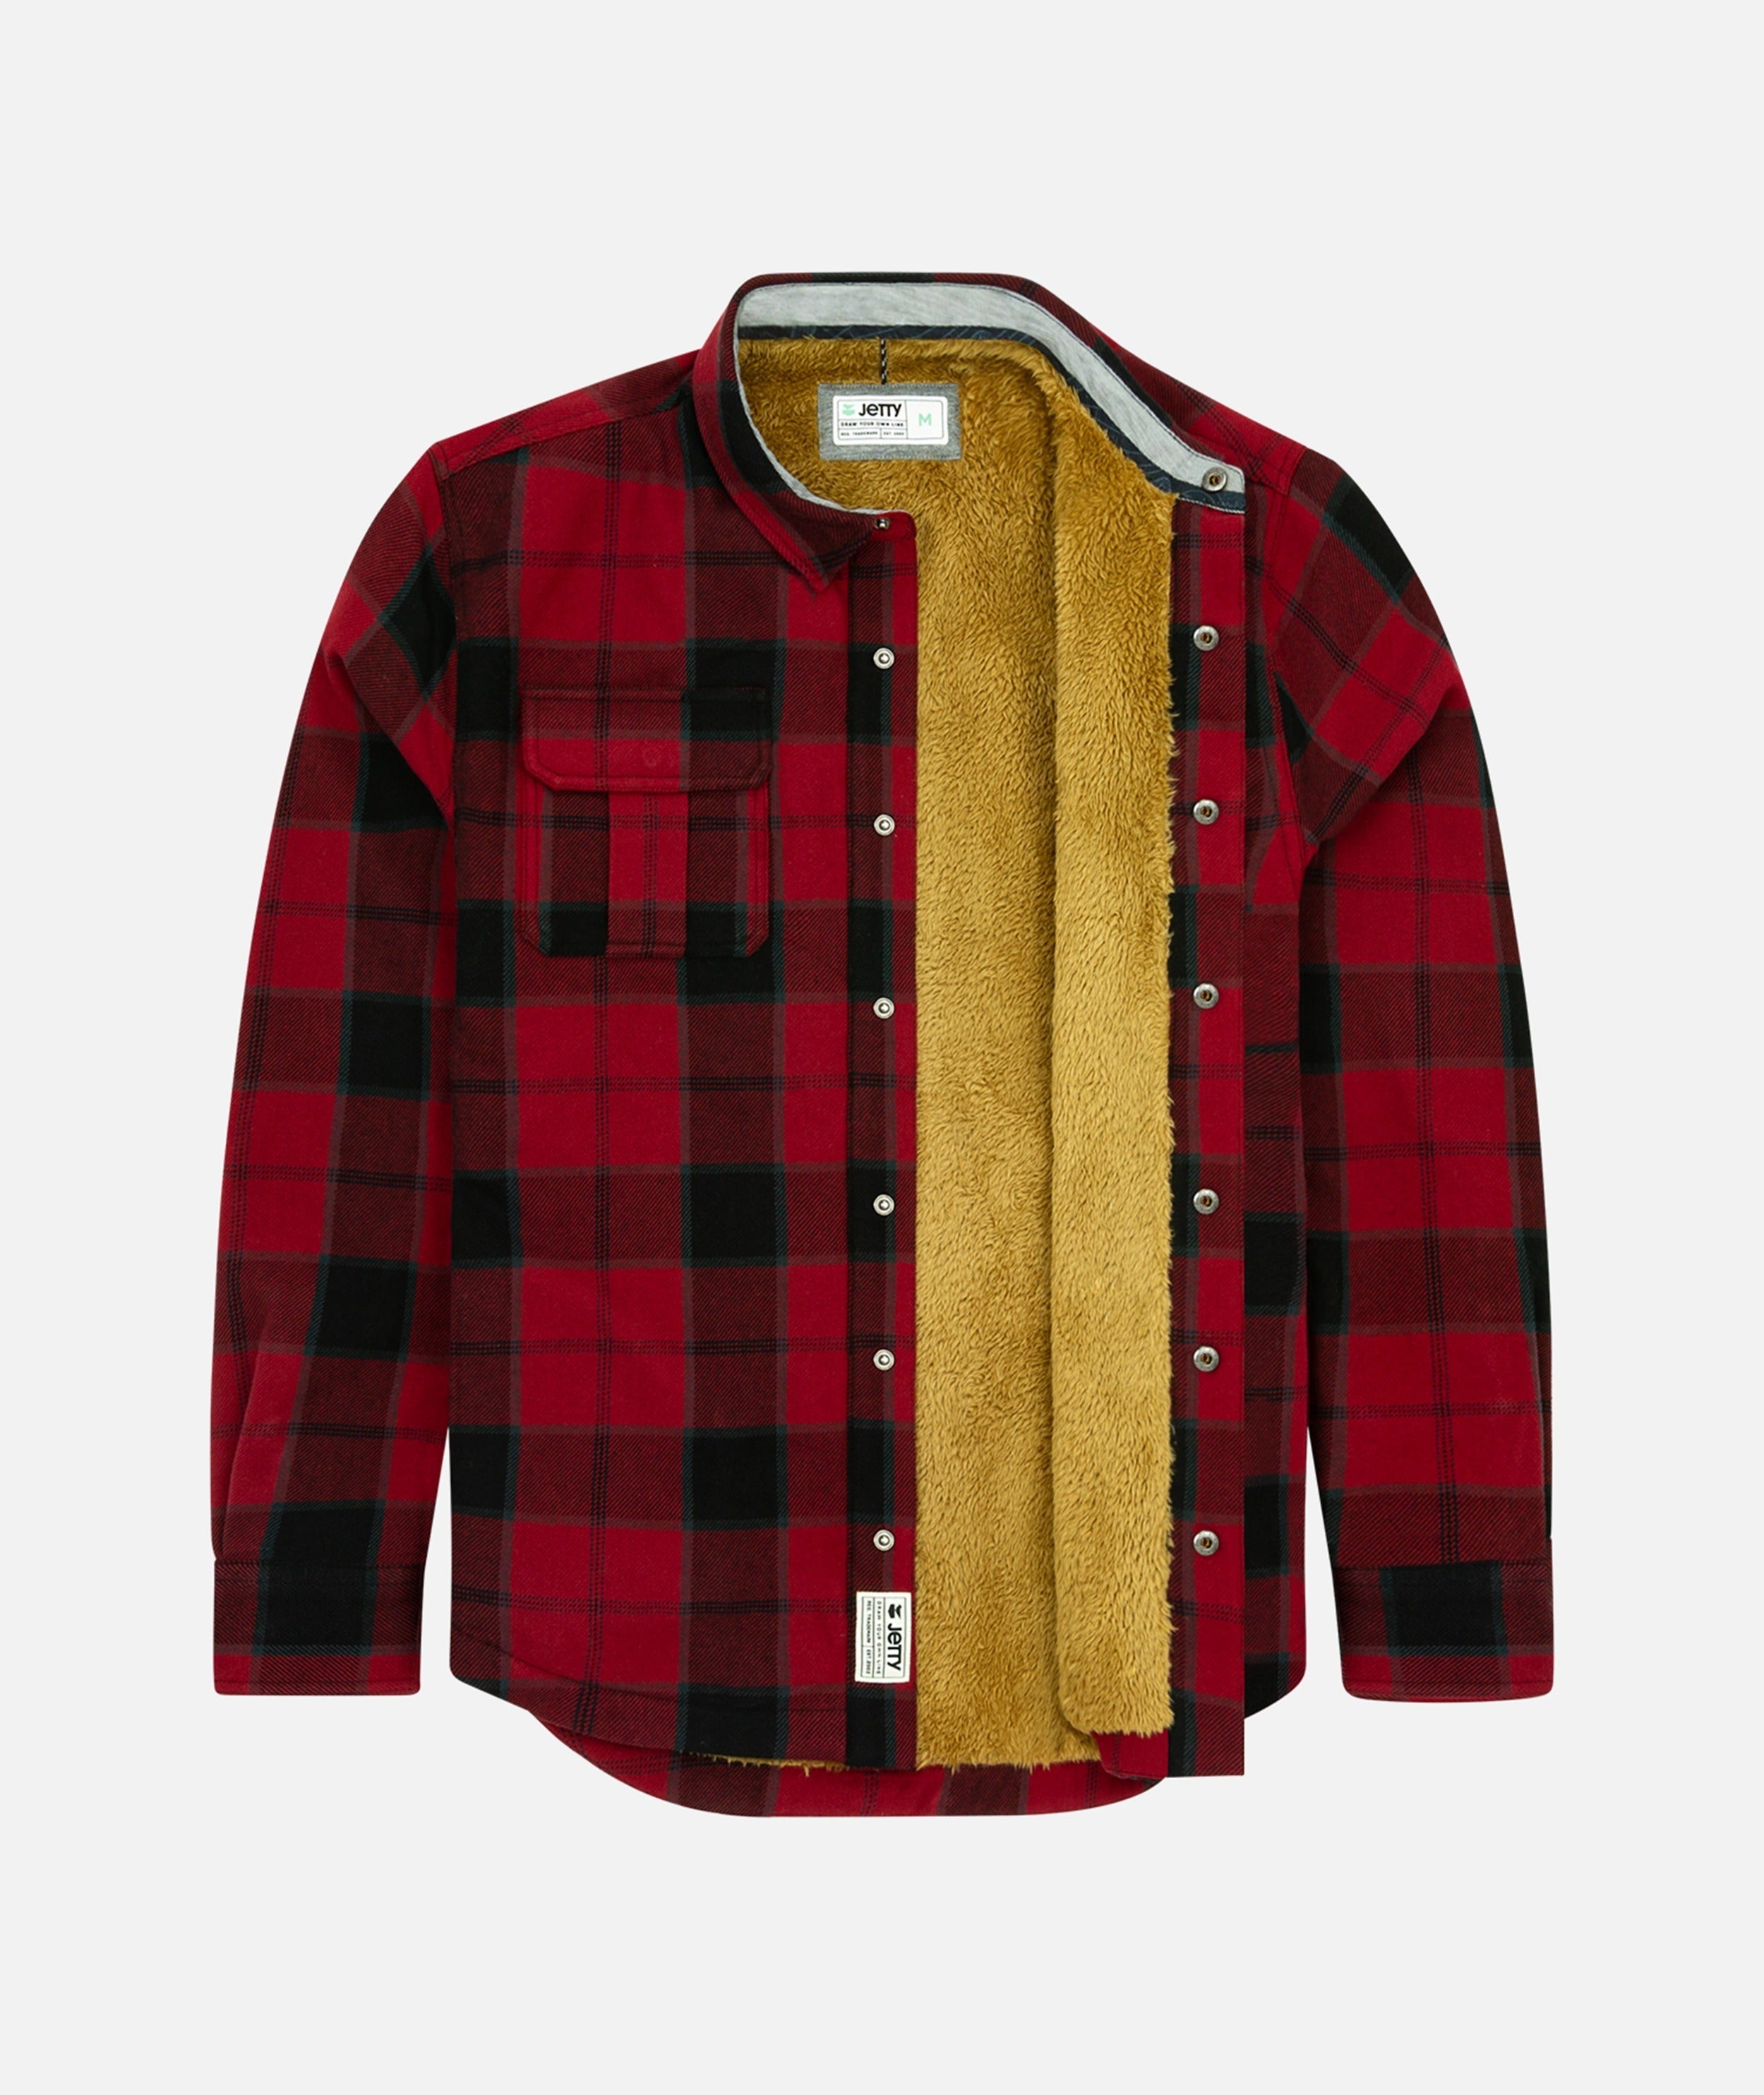 The Sherpa Jacket - Red